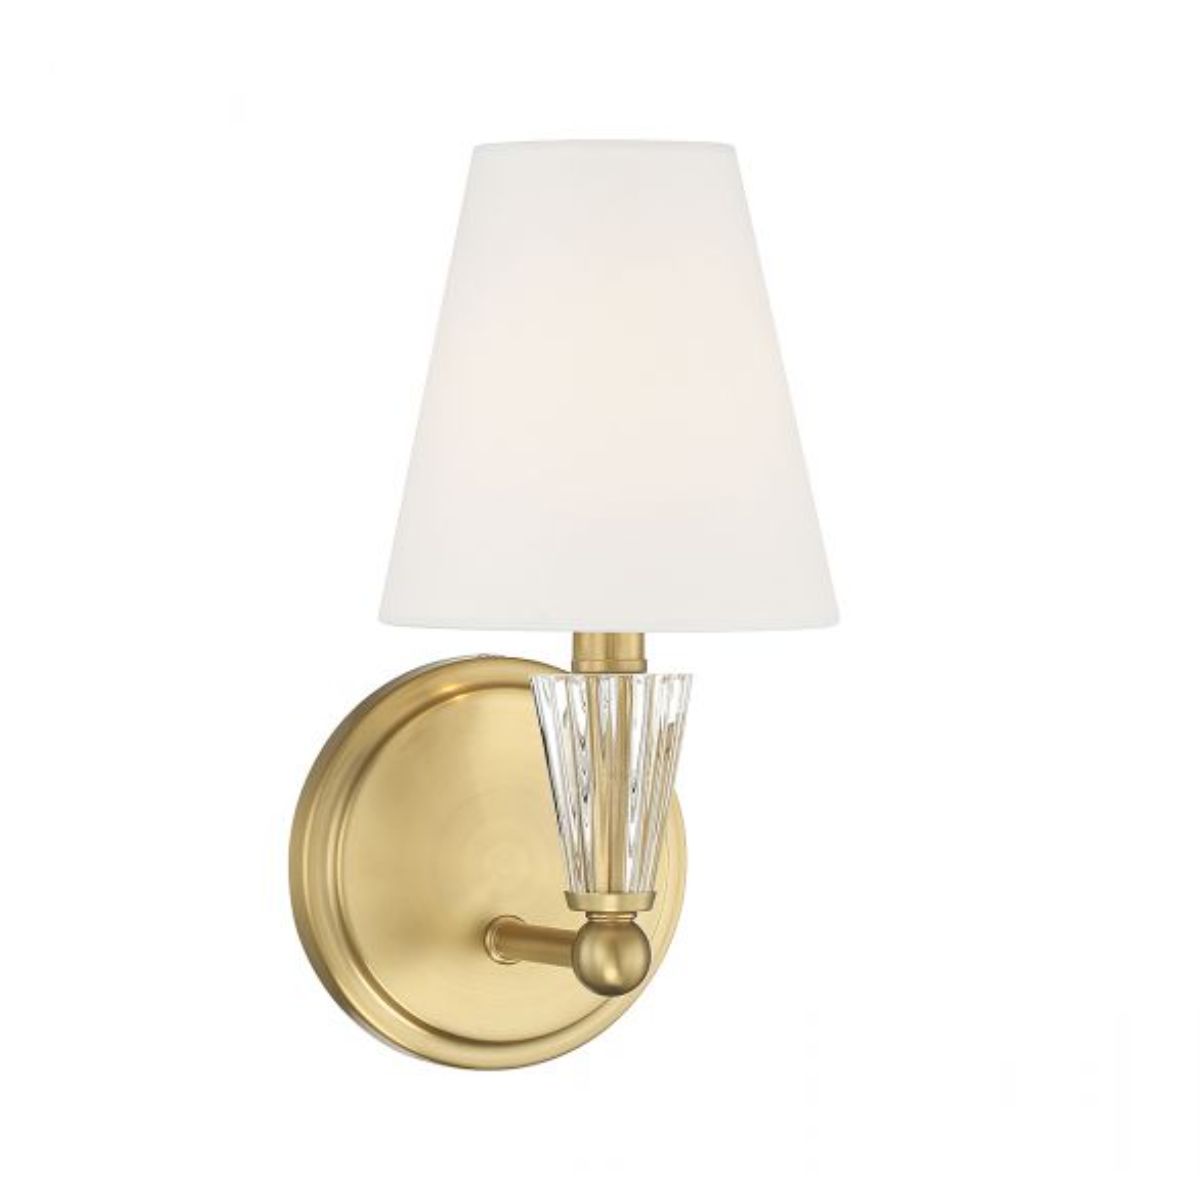 12 in. Armed Sconce